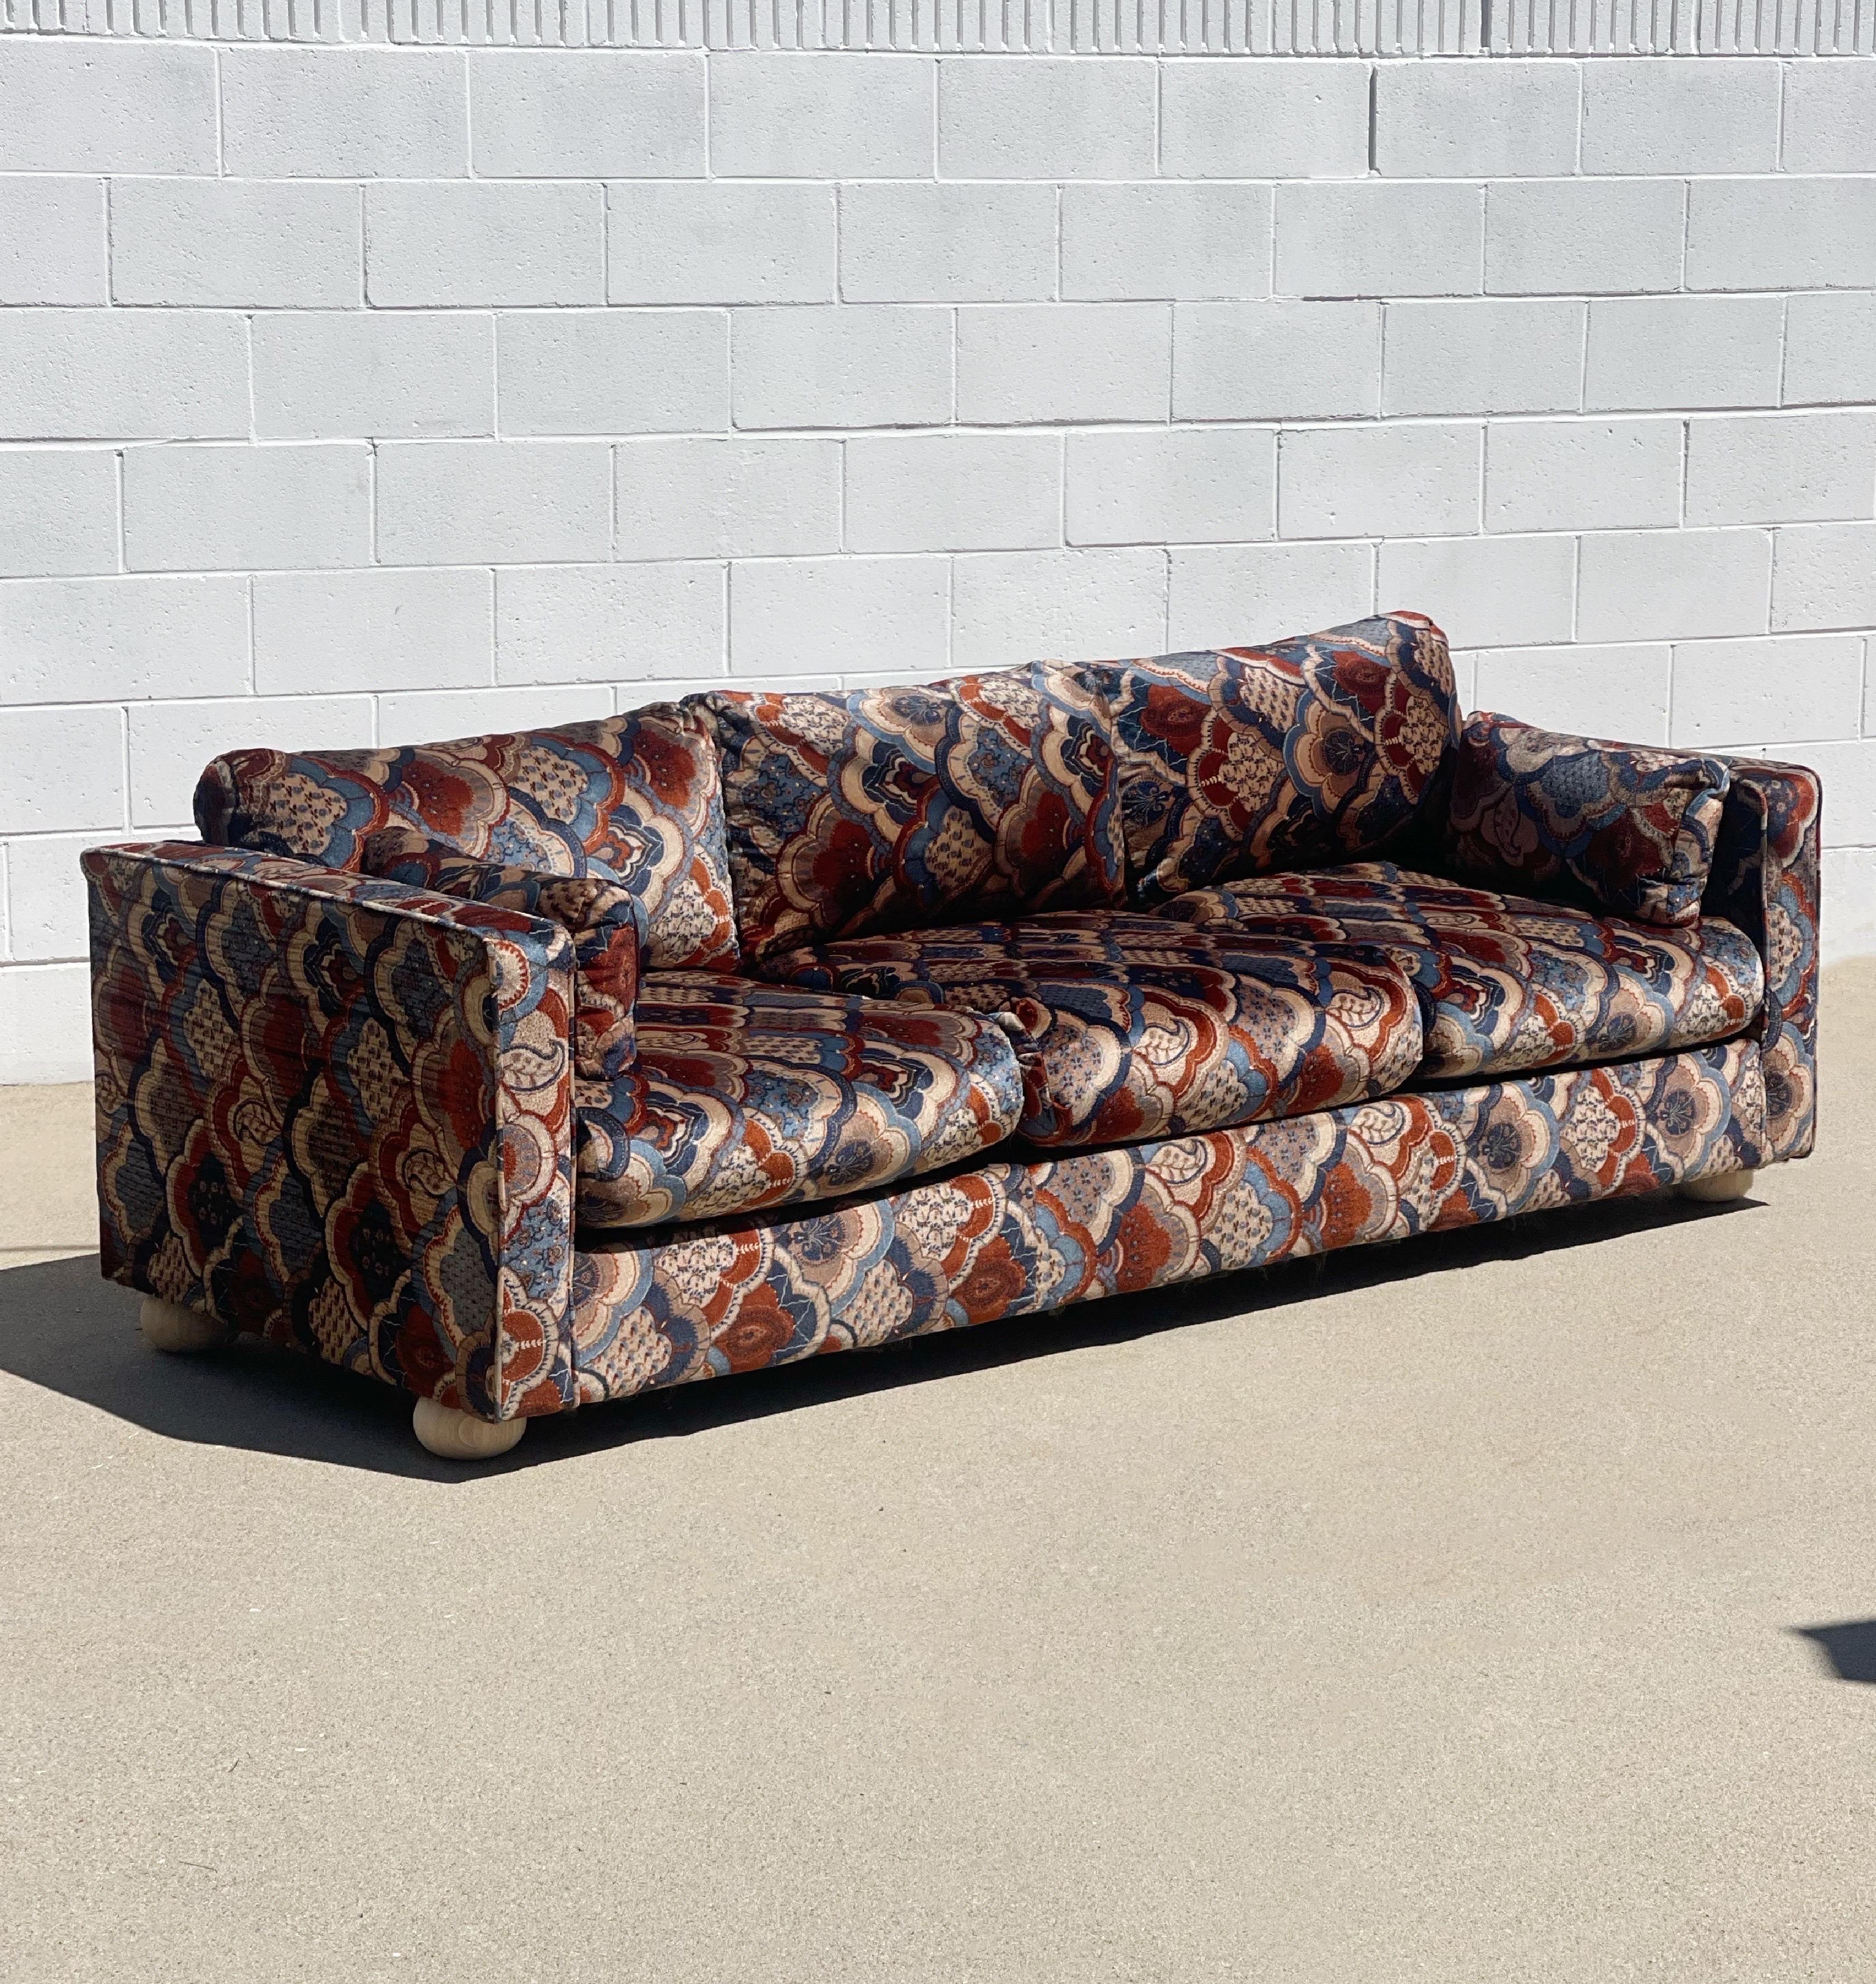 89” W • 35 D • 29” H 16.5” Seat H
Stunning original paisley fabric, super comfortable. I also have a matching love seat in my other listings. 